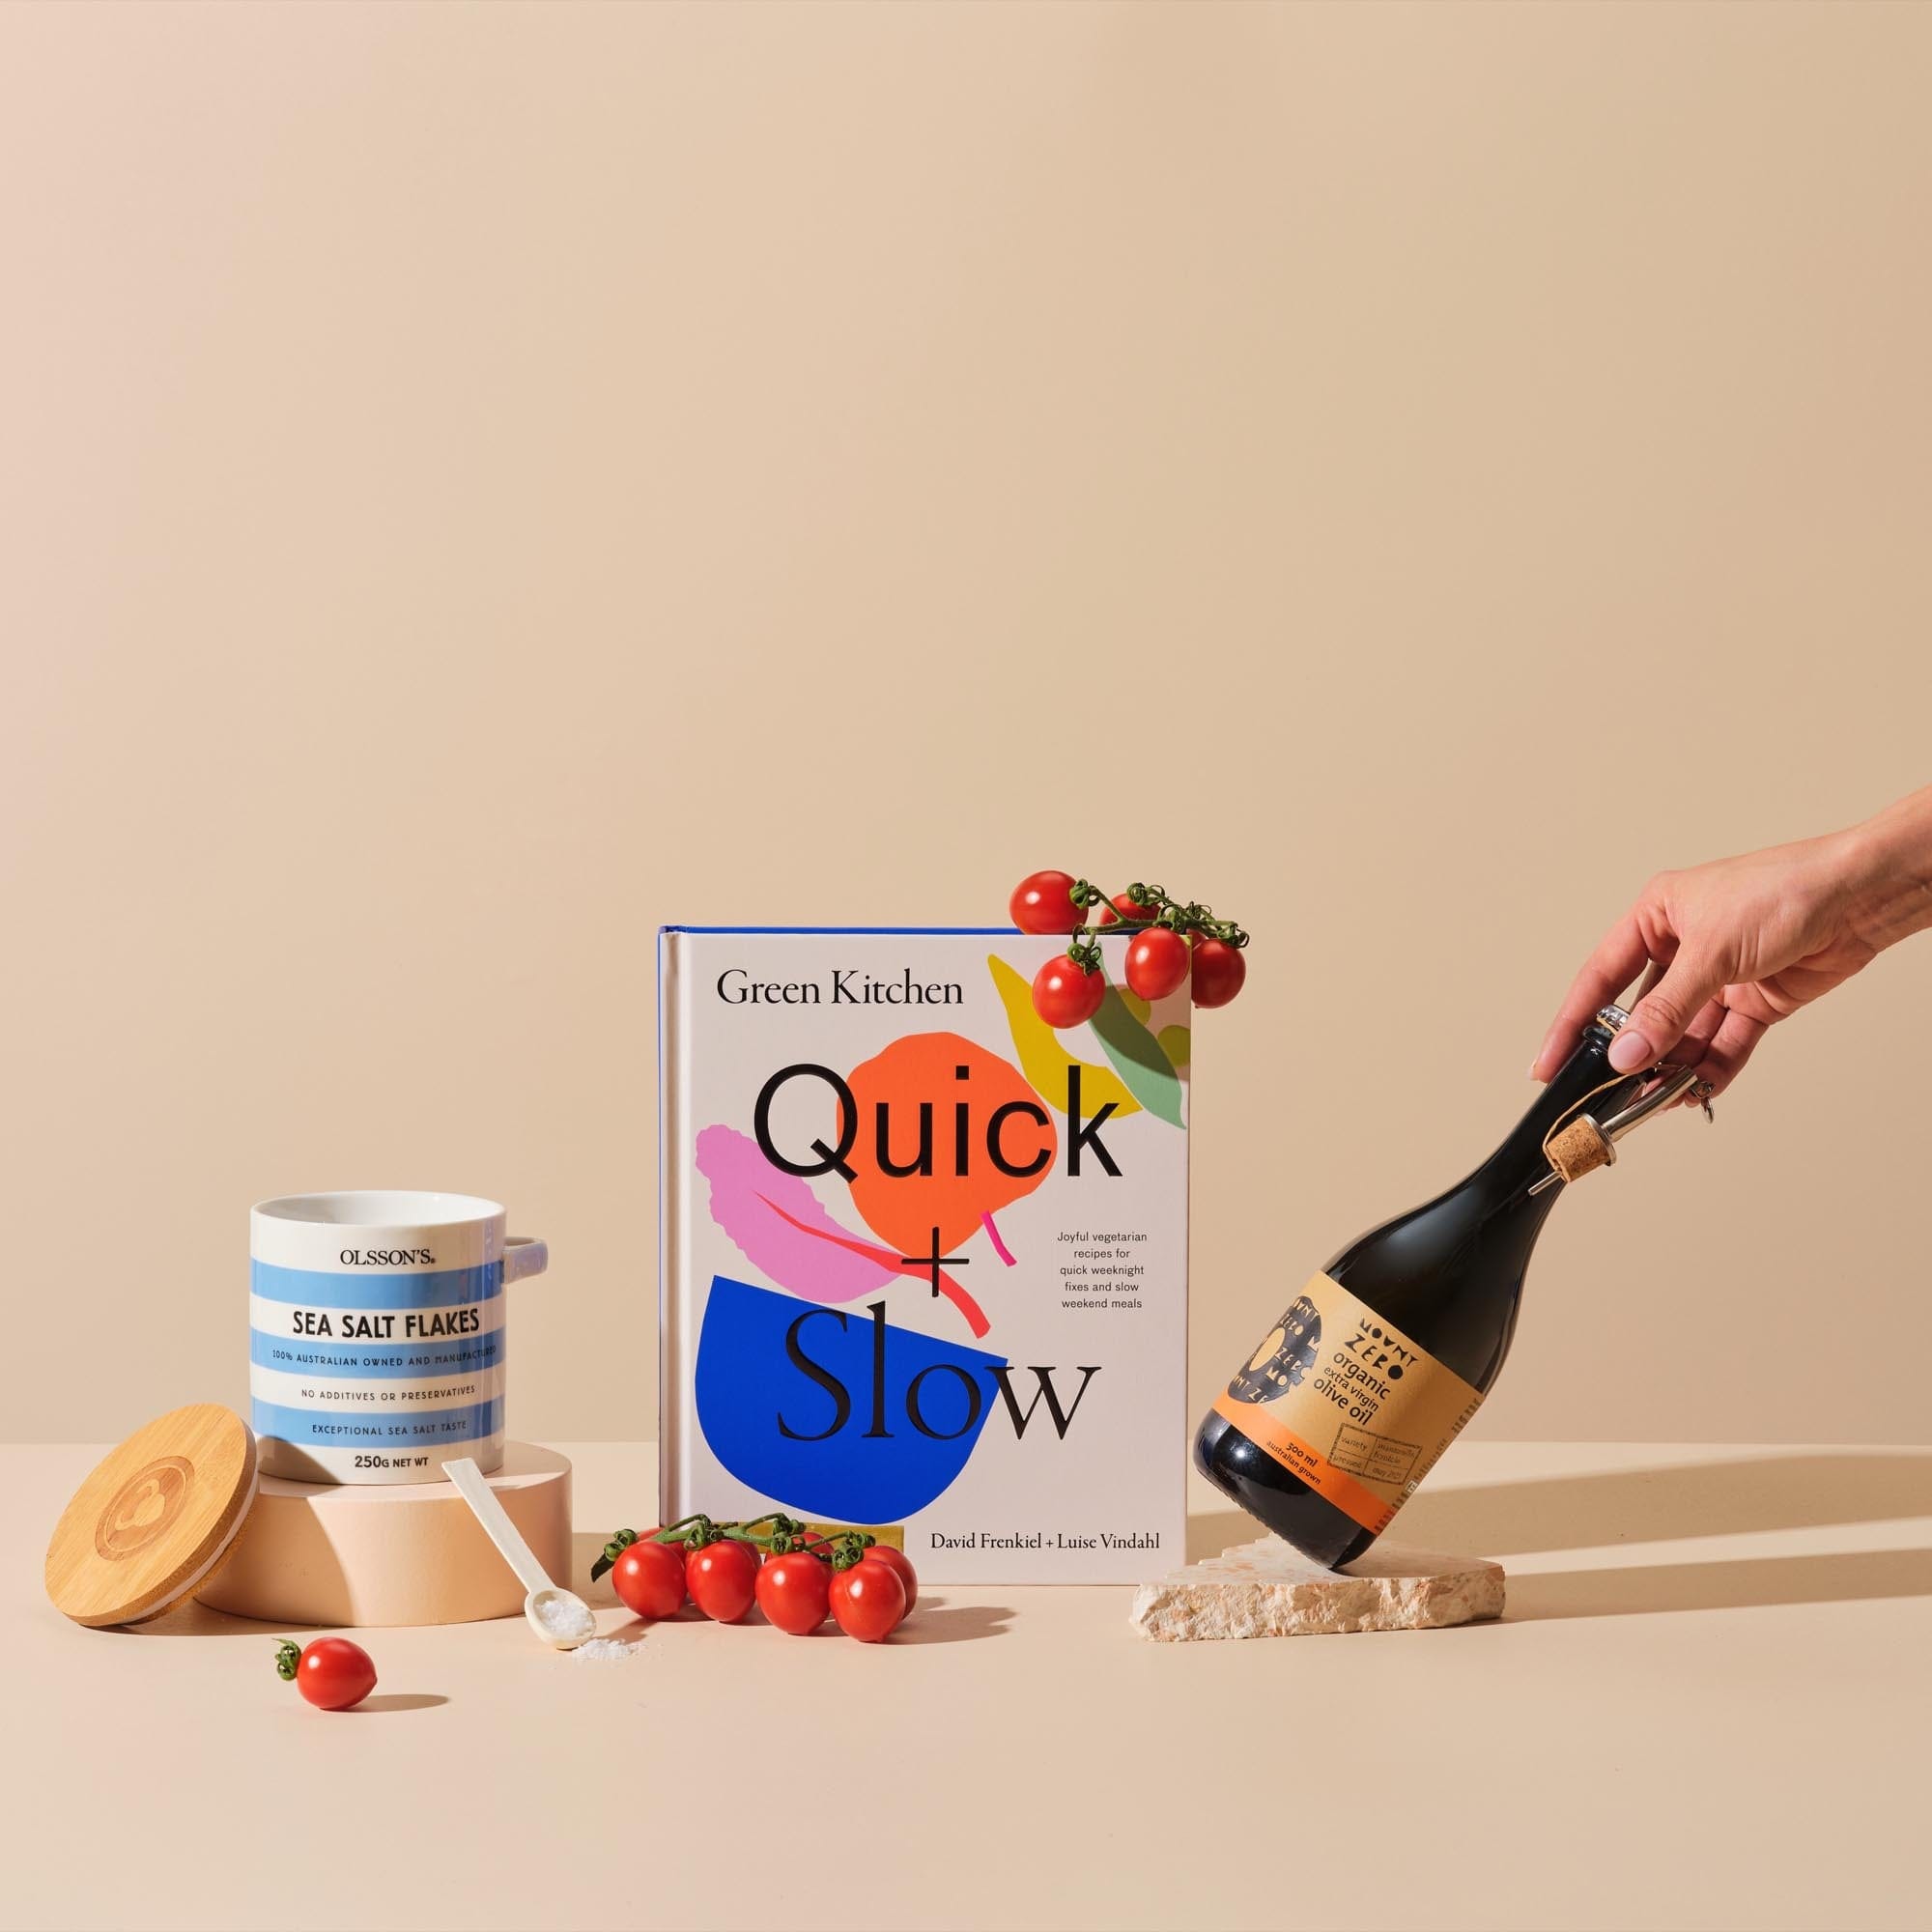  This image displays the gift bundle 'Veg Out' featuring the cover of 'Quick and Slow', Mount Zero Olive Oil, Olsson's Sea Salt Flakes - accessorised with red cherry tomatoes.